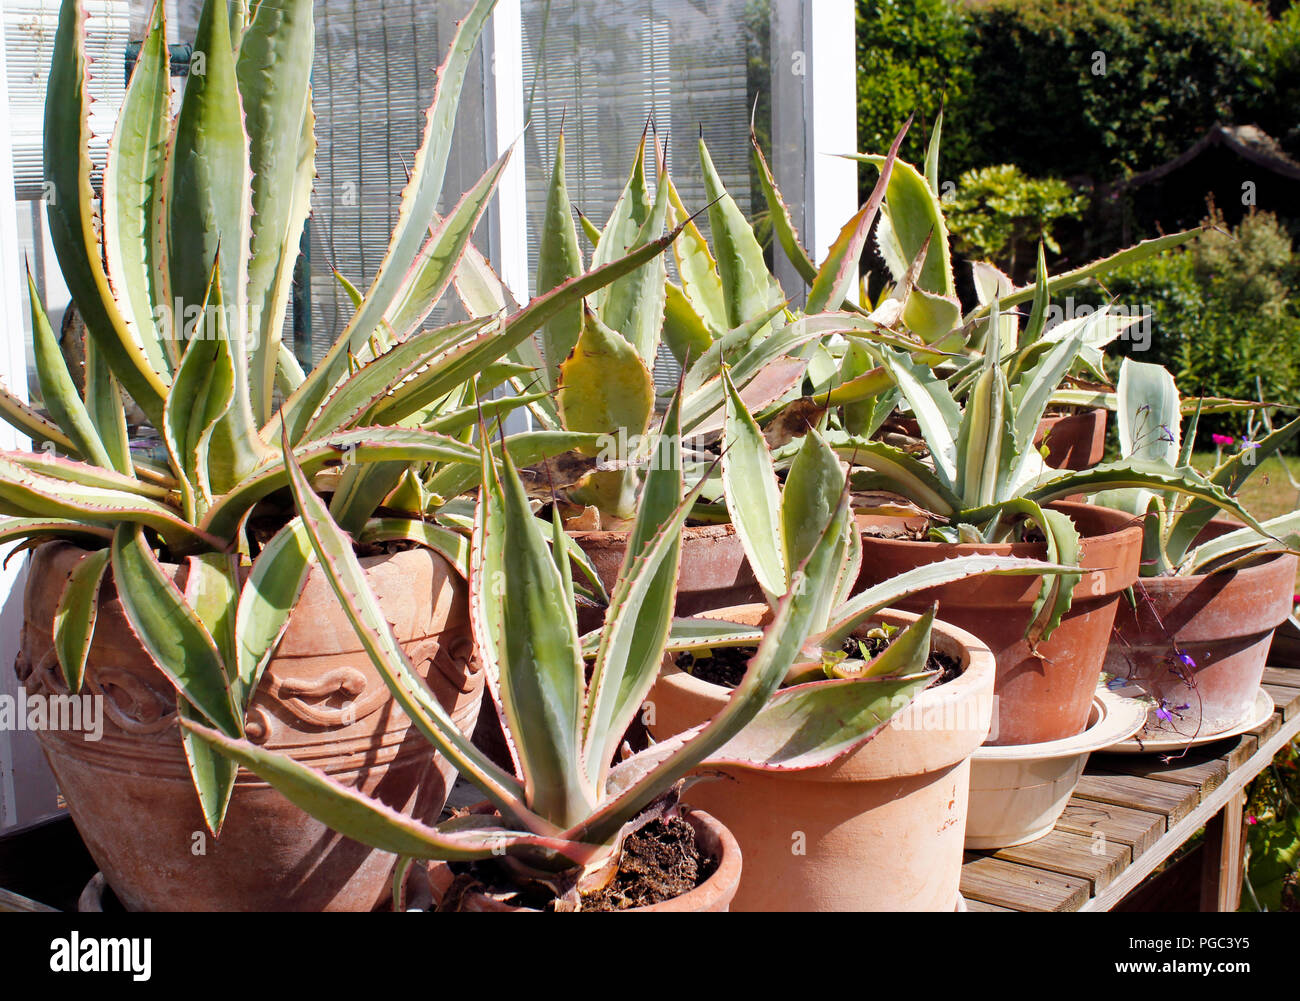 Agave selection of mixed agave plants in pots Stock Photo